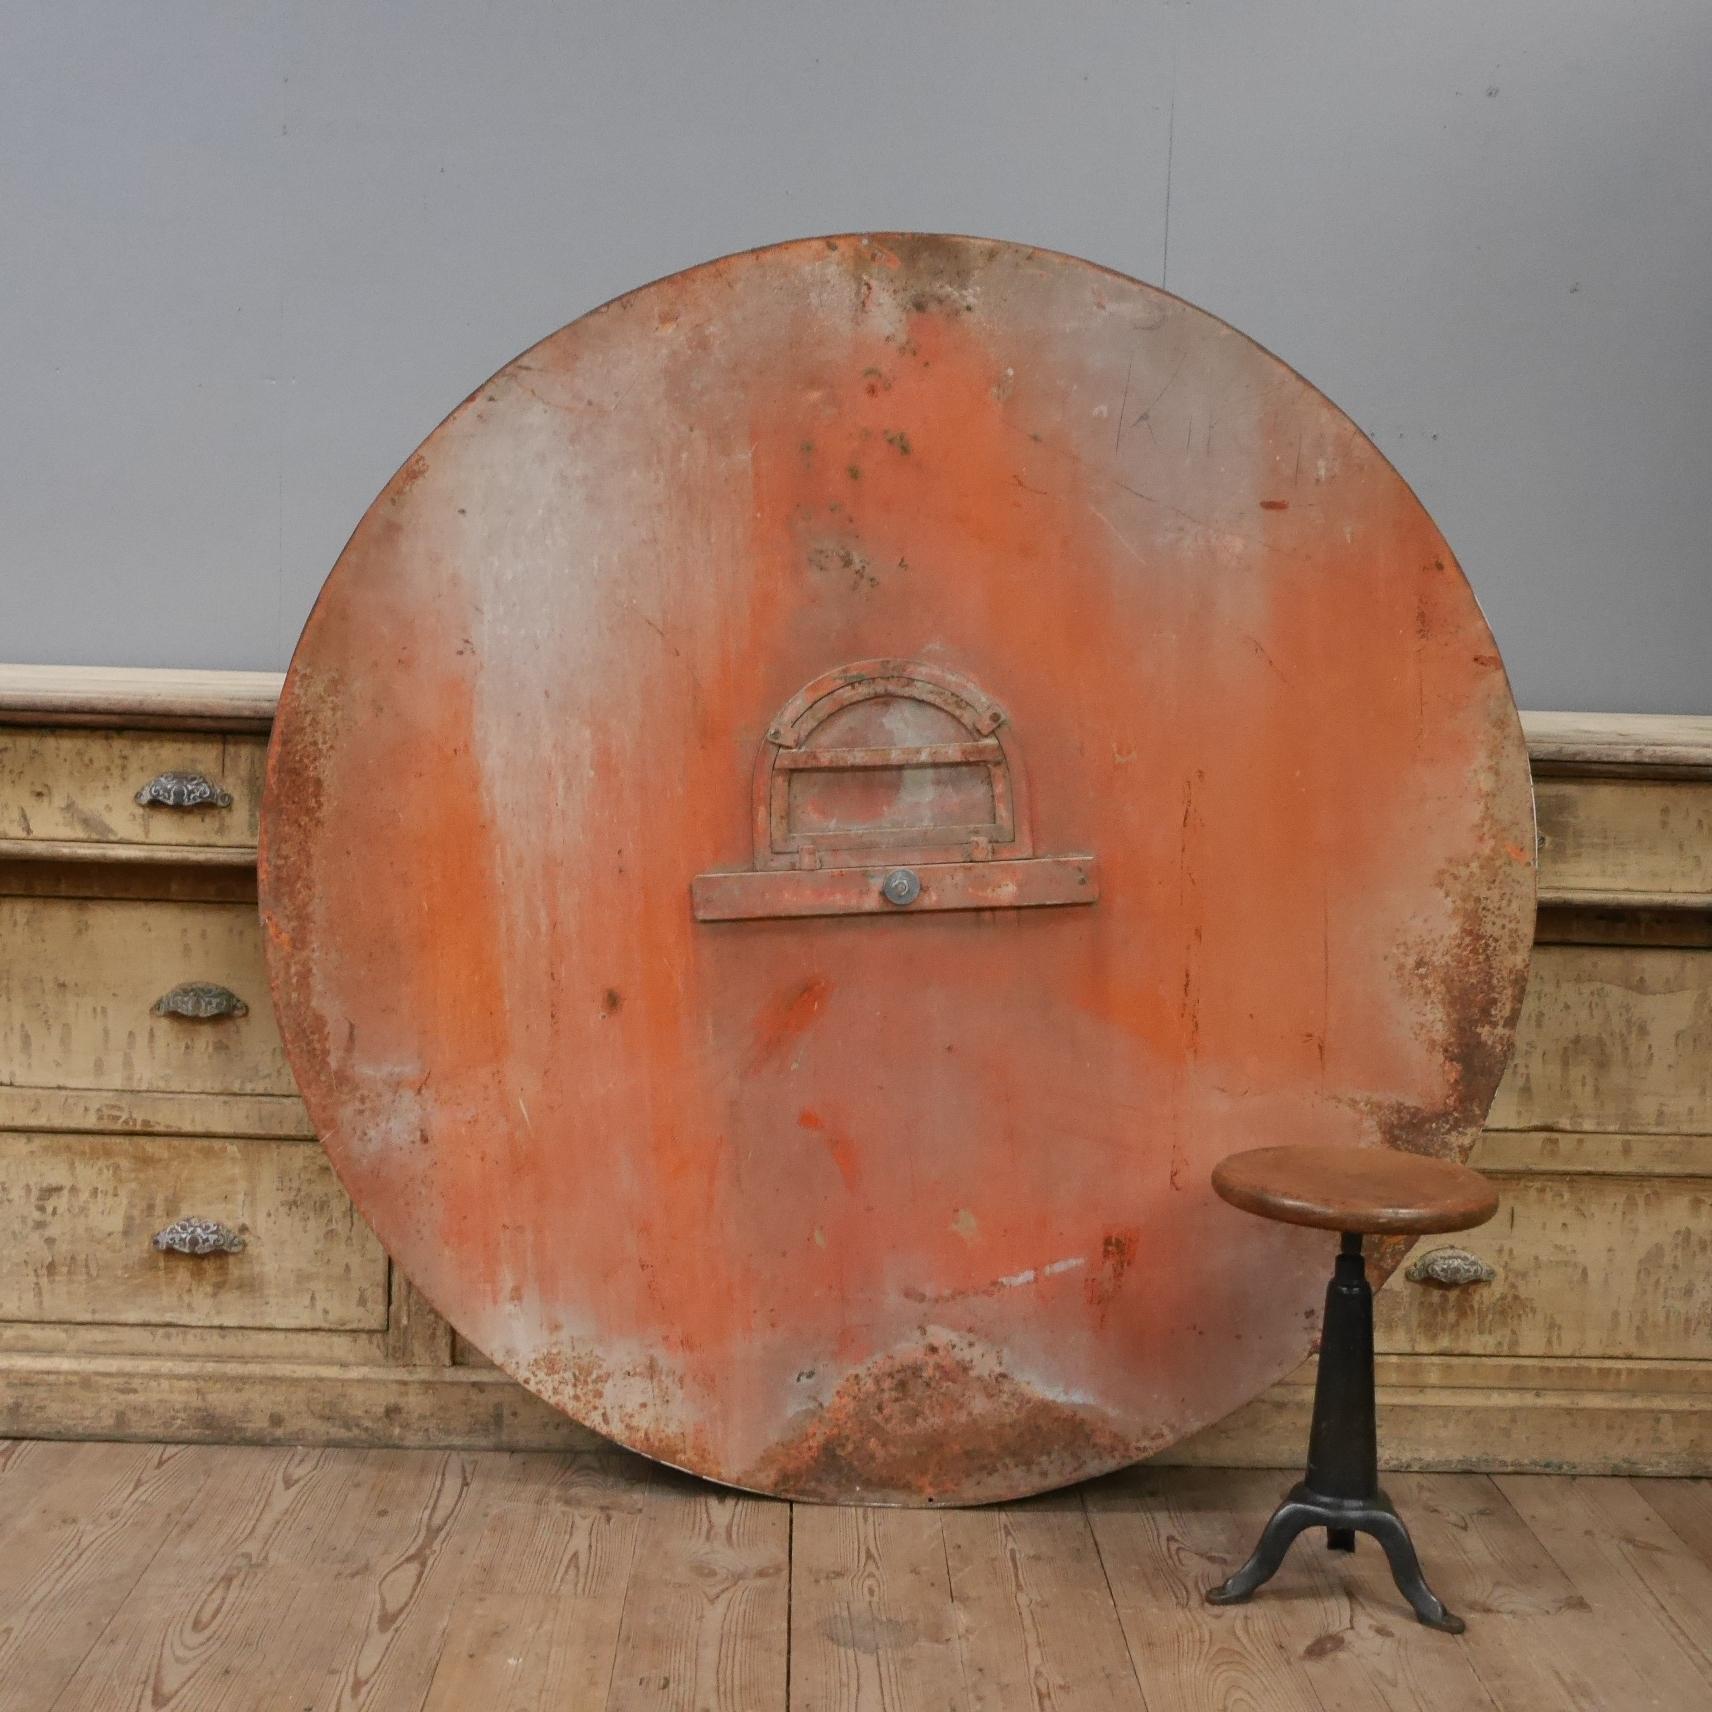 Huge Parisian Tower Clock Face in Original Paint In Good Condition For Sale In Downham Market, GB